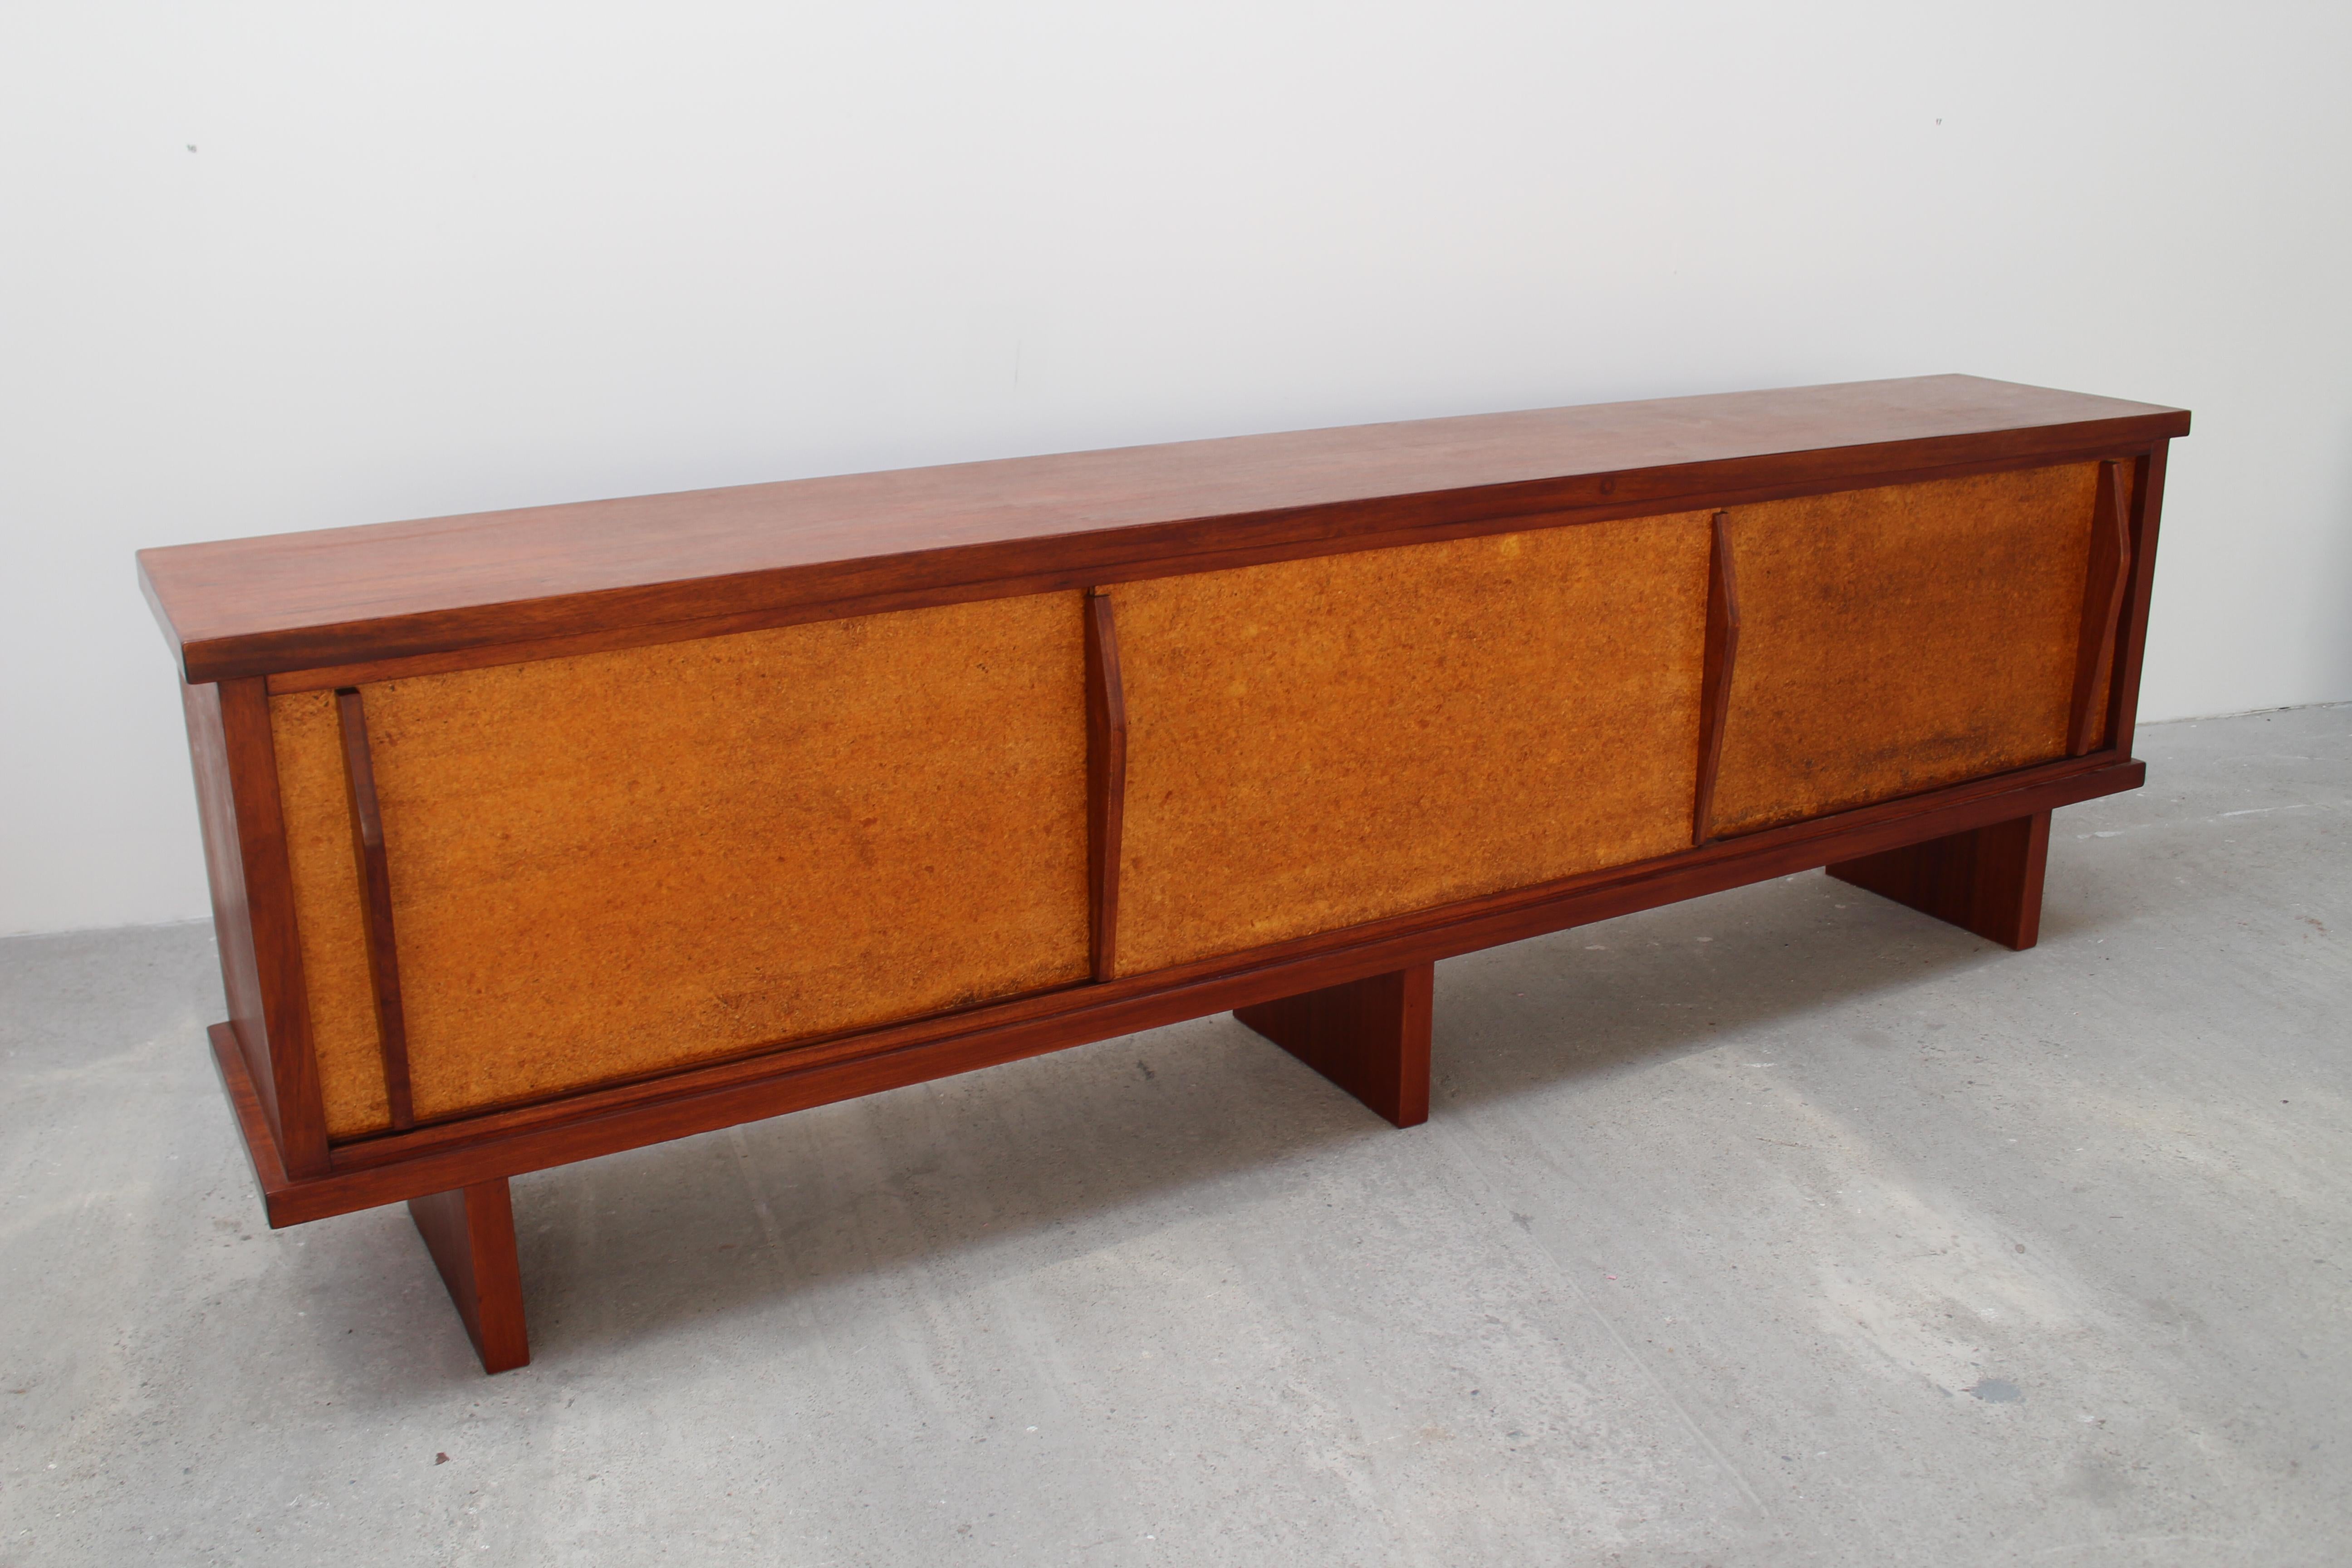 Sideboard solid mahogany wood.
1954. Original doors and system maded by Charlotte Perriand 
provenance : from city of Le Mans - building 